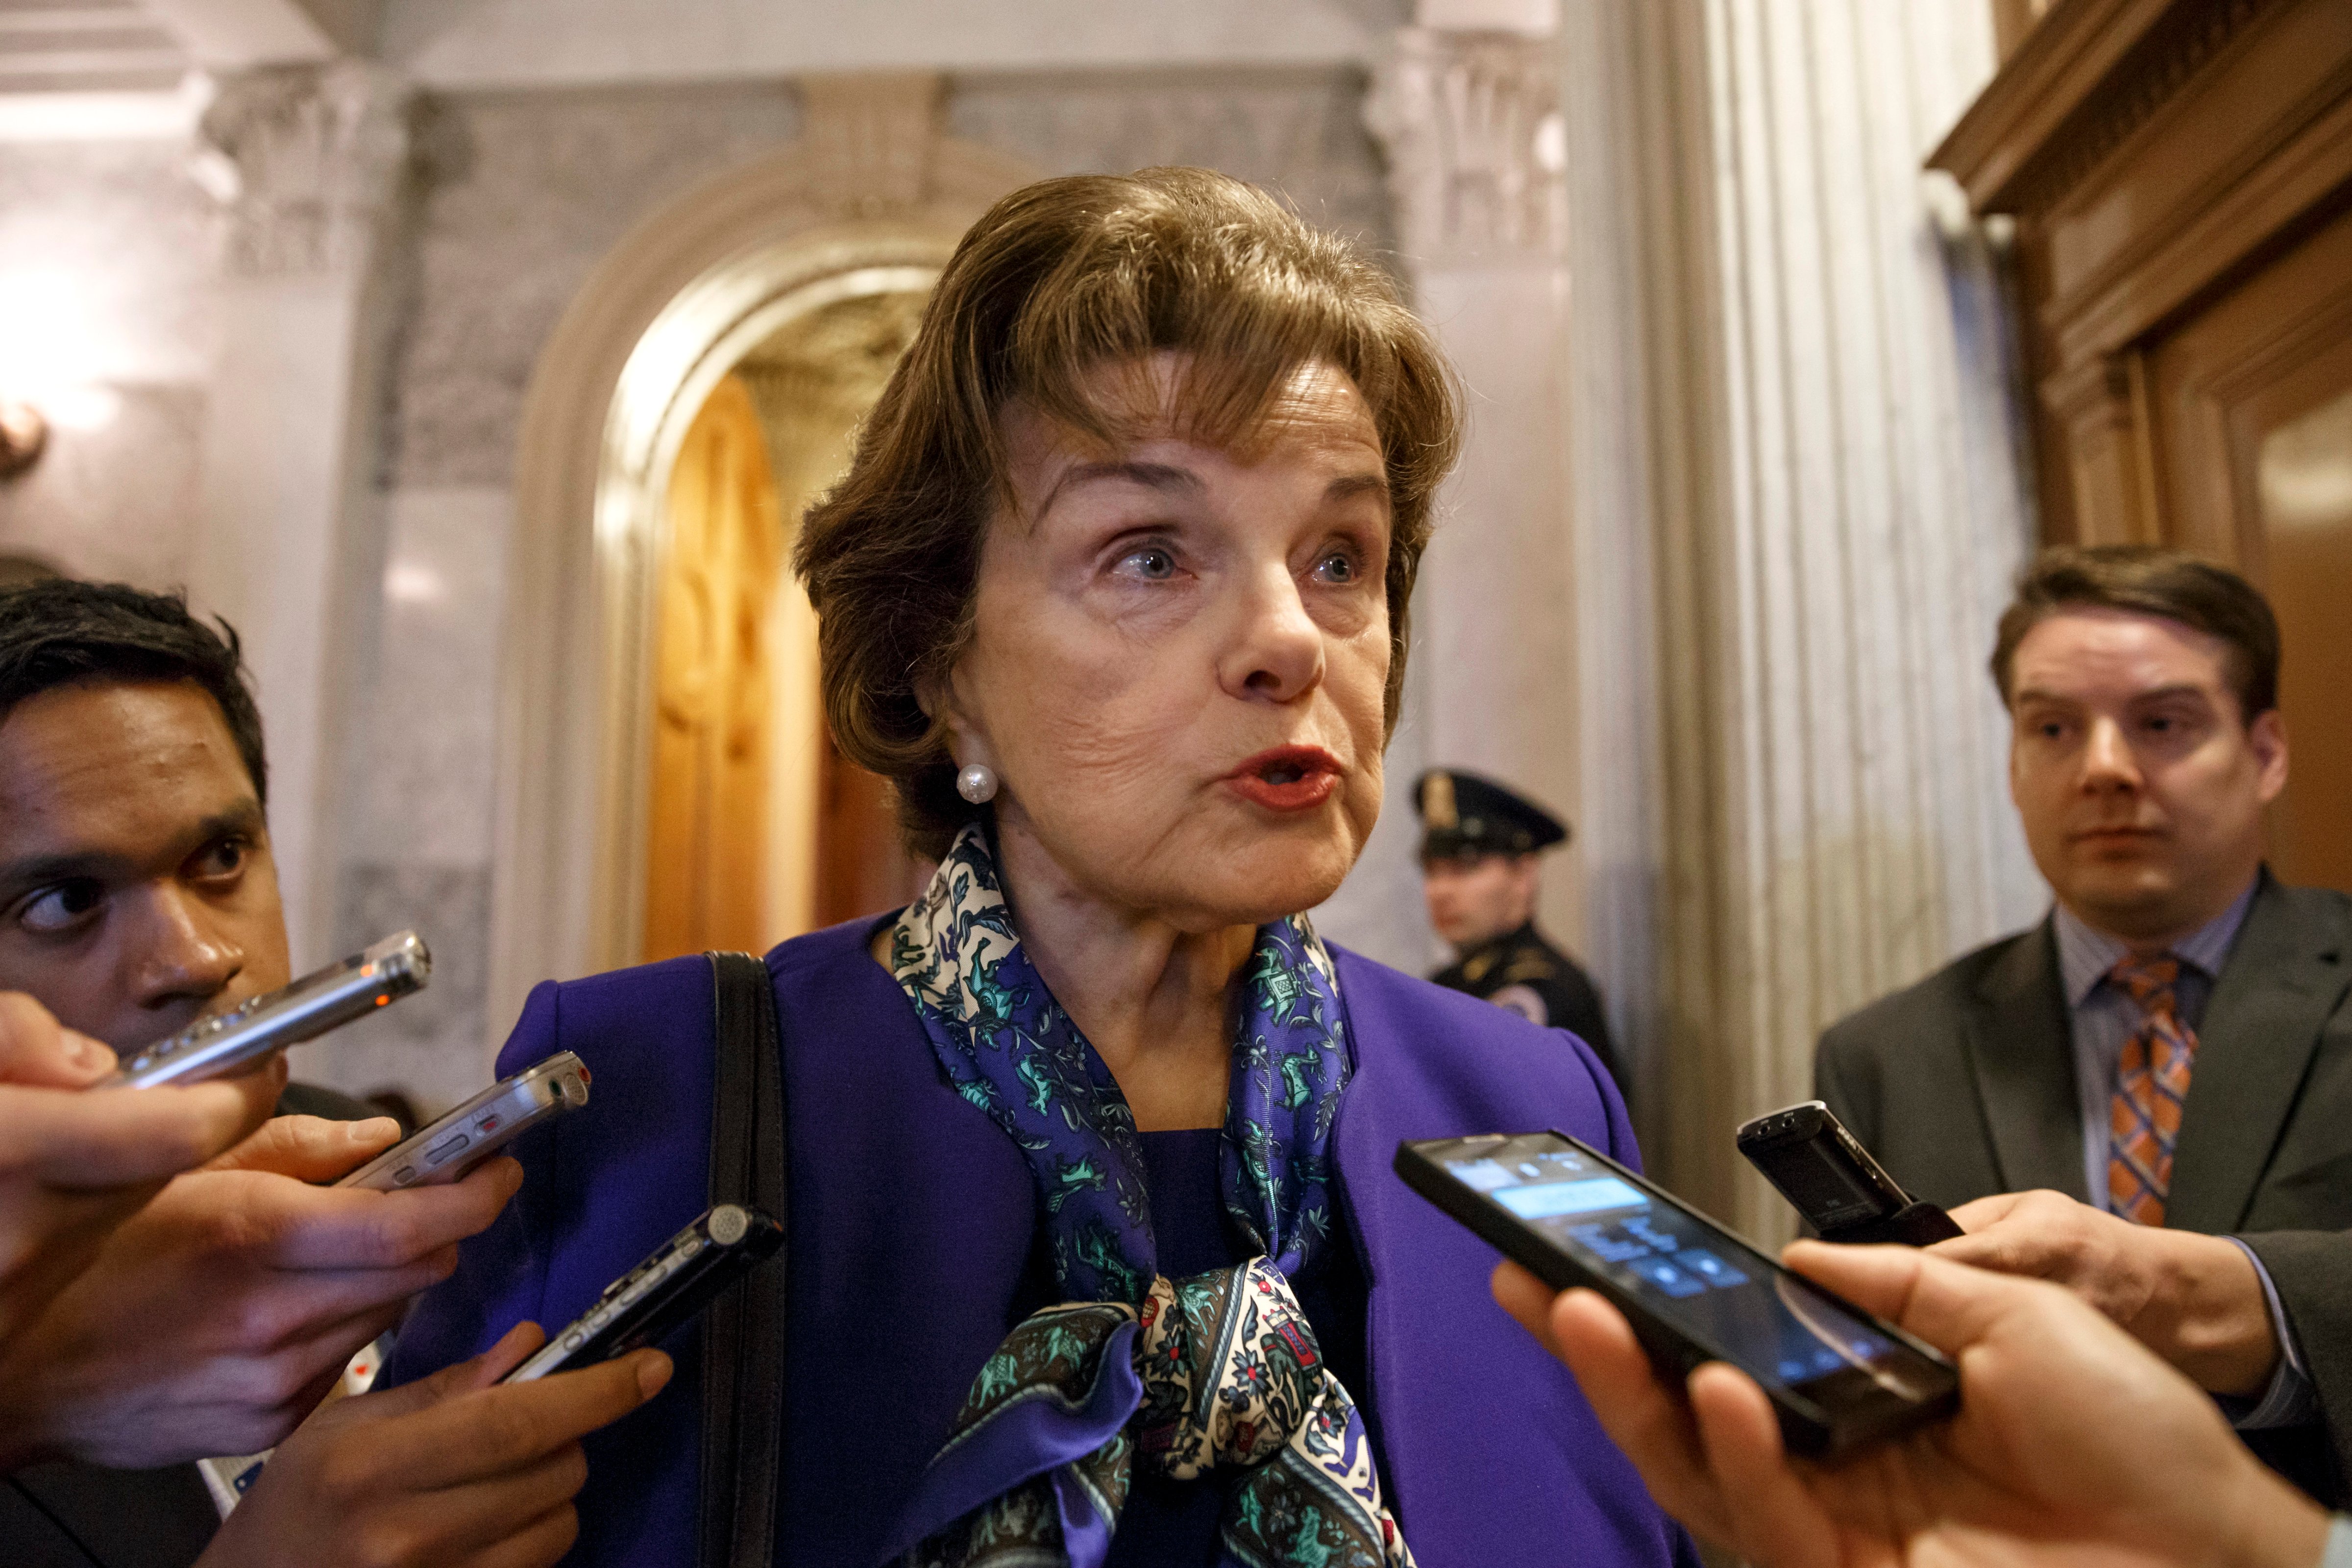 Senate Intelligence Committee Chair Senator Dianne Feinstein talks to reporters as she leaves the Senate chamber on Capitol Hill in Washington, Tuesday, March 11, 2014, after saying that the CIA's improper search of a stand-alone computer network established for Congress has been referred to the Justice Department. The issue stems from the investigation into allegations of CIA abuse in a Bush-era detention and interrogation program. (AP Photo/J. Scott Applewhite)